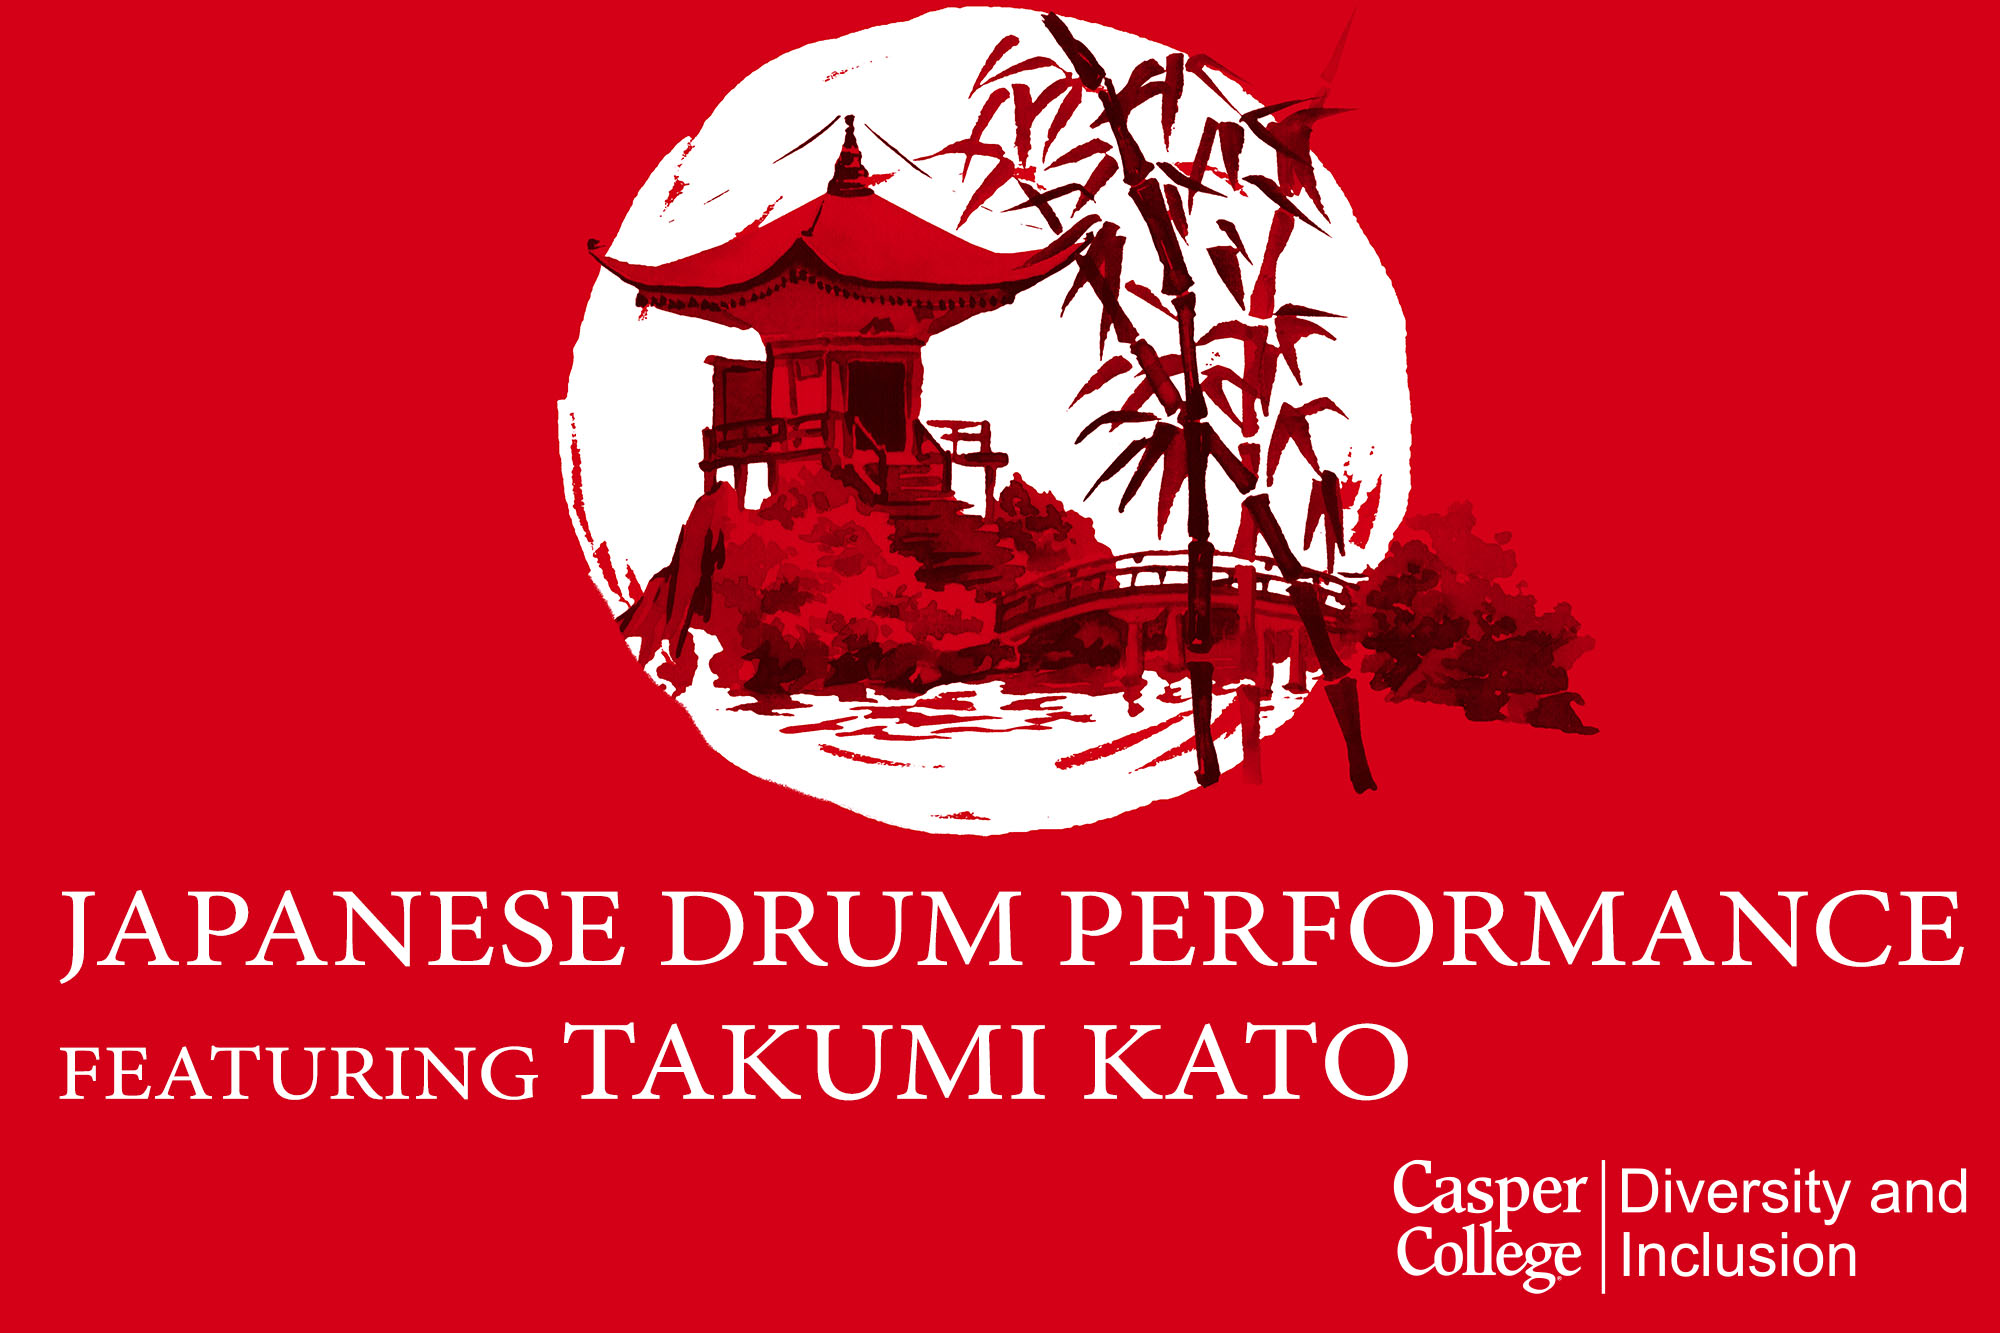 Image for Taiko drumming performance press release.